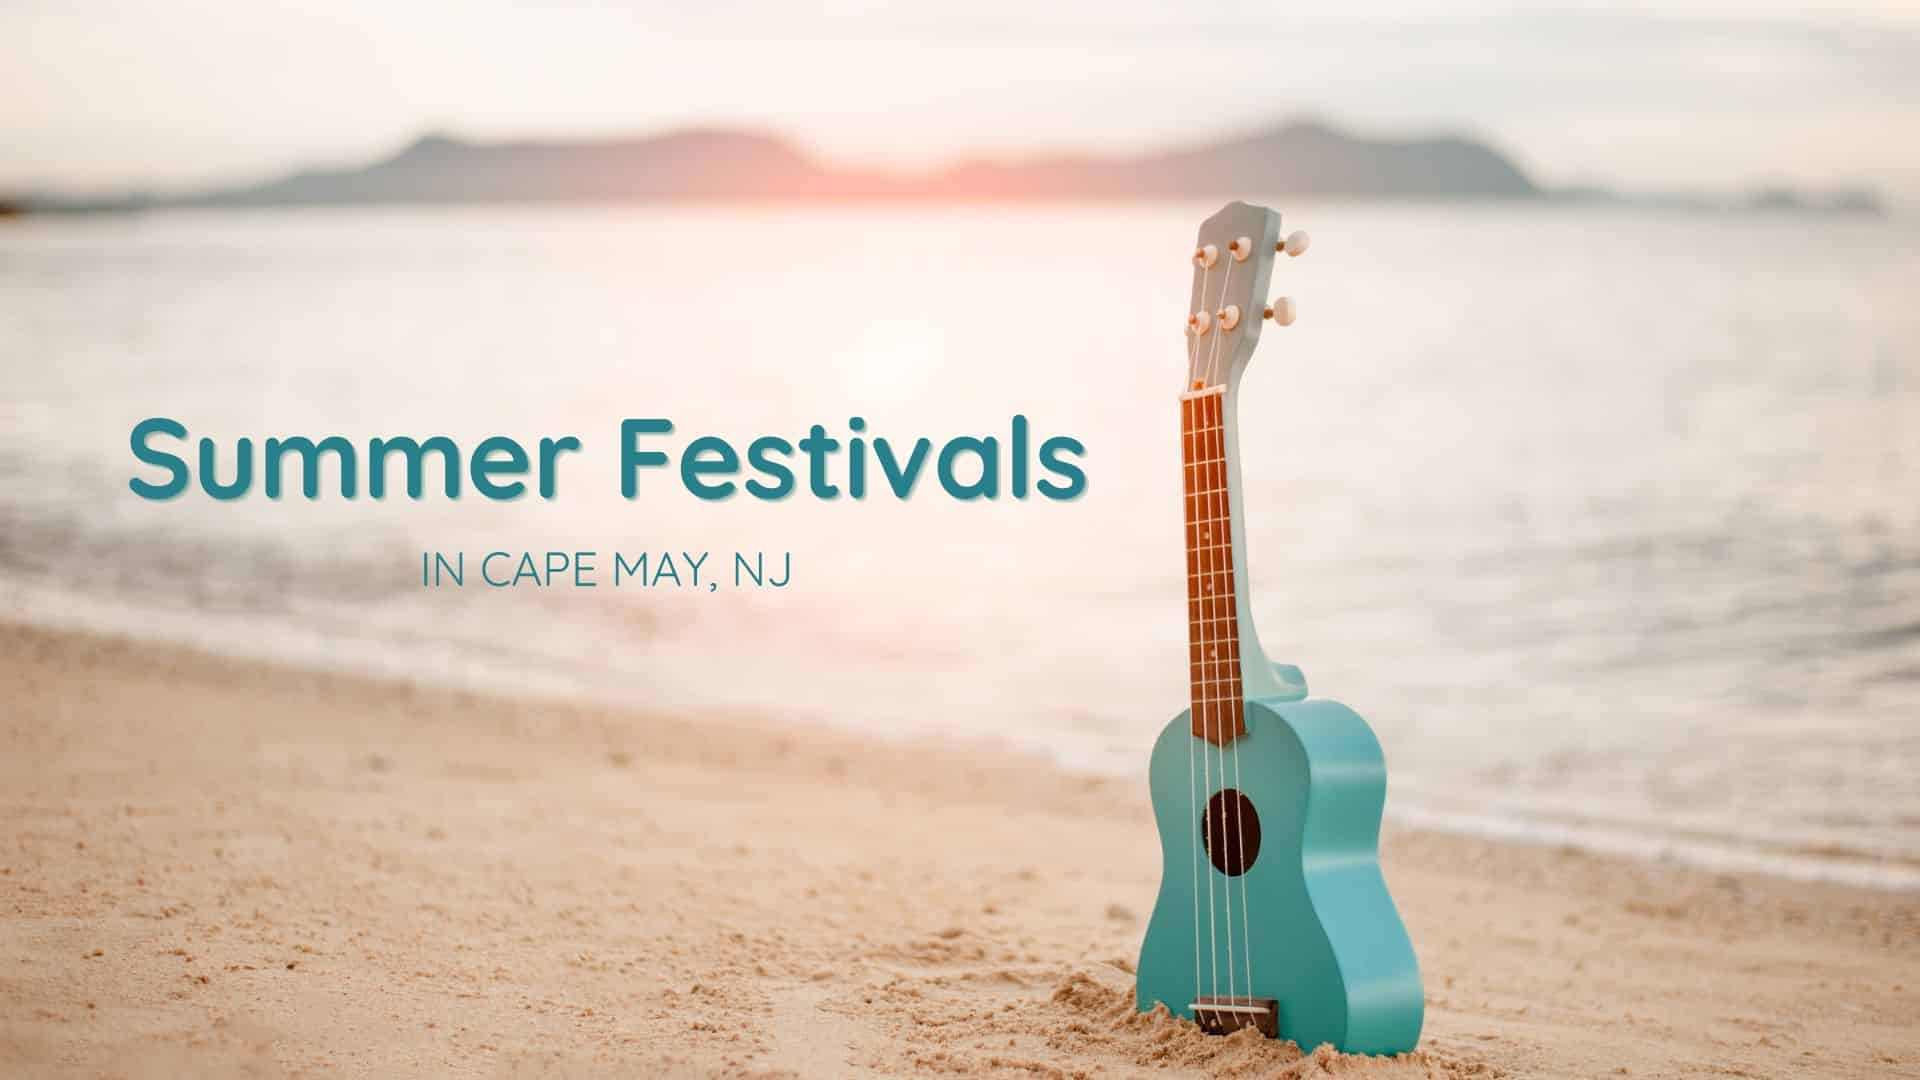 Teal-colored guitar stuck in the sand on a beach. The text reads, “Summer Festivals in Cape May, NJ.”